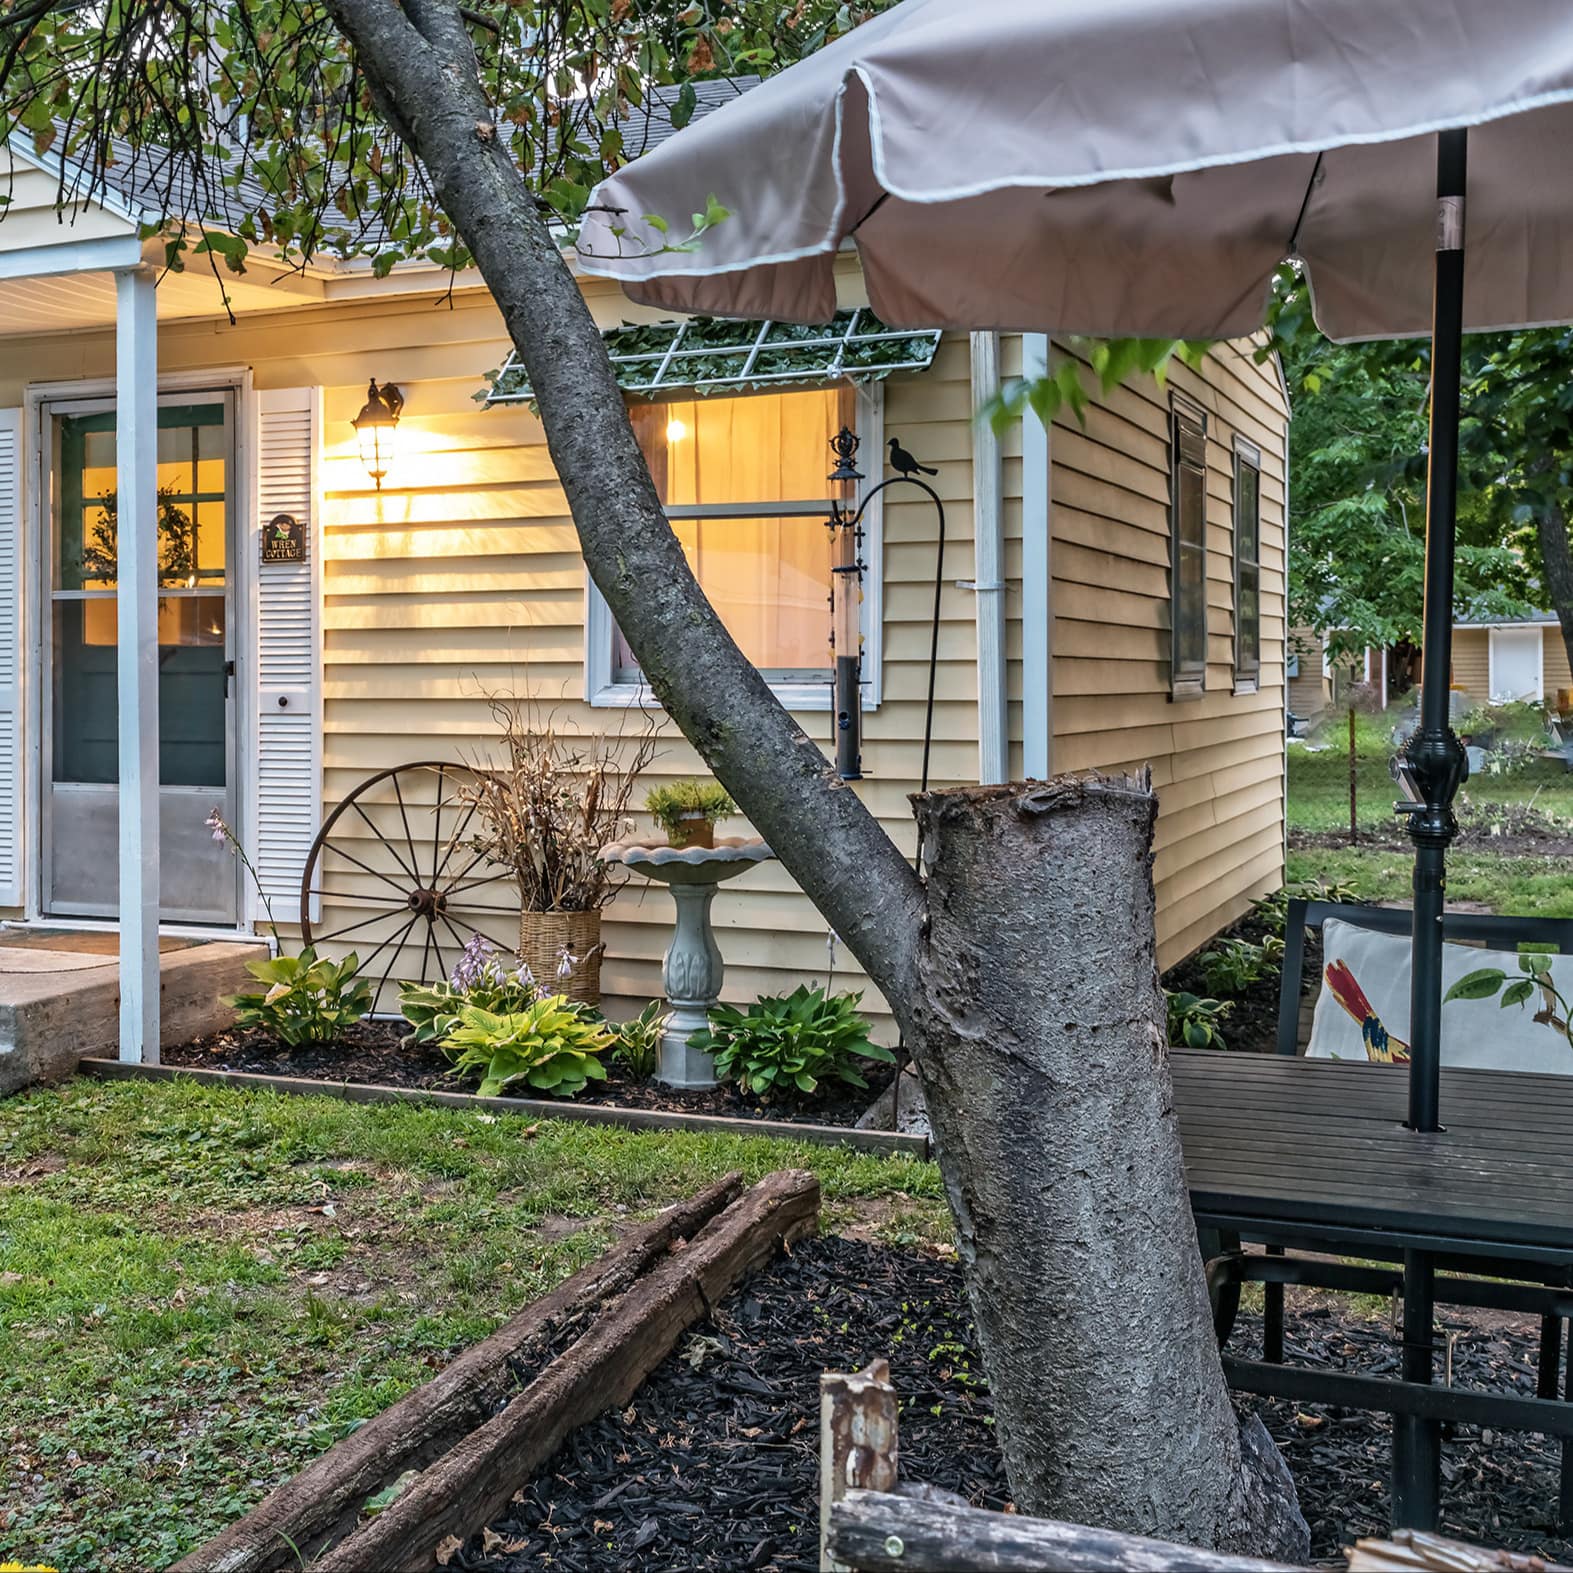 A small guest house with a garden and outdoor table underneath a tree in Kansas City